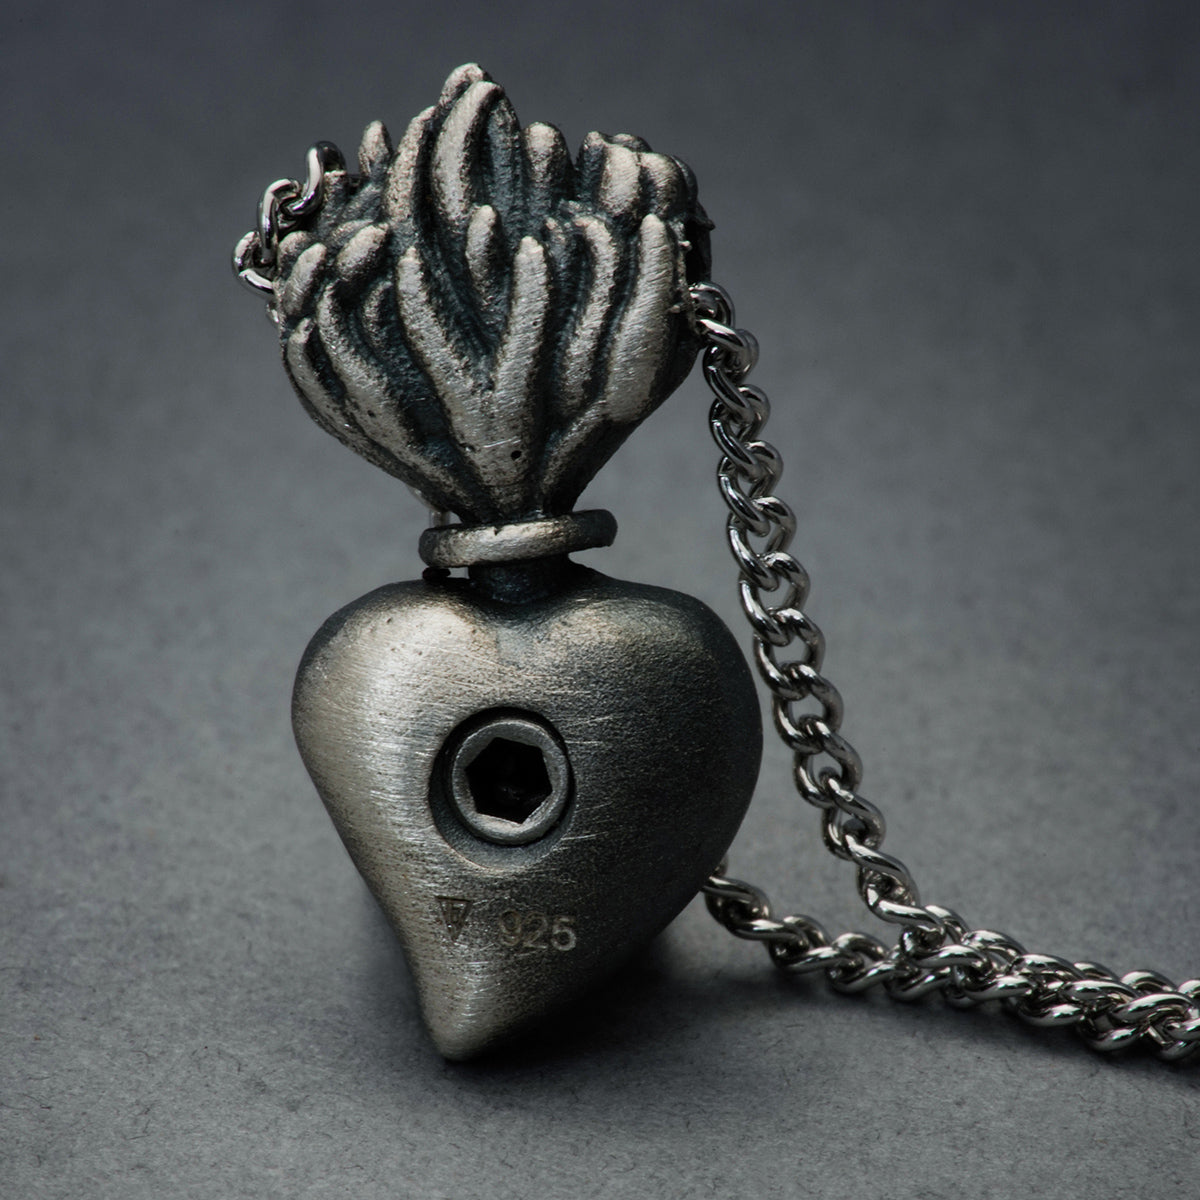 Small Cylinder Cremation Urn Necklace - Heart Shaped 'Mom' Charm - Bea –  Eternal Keepsake